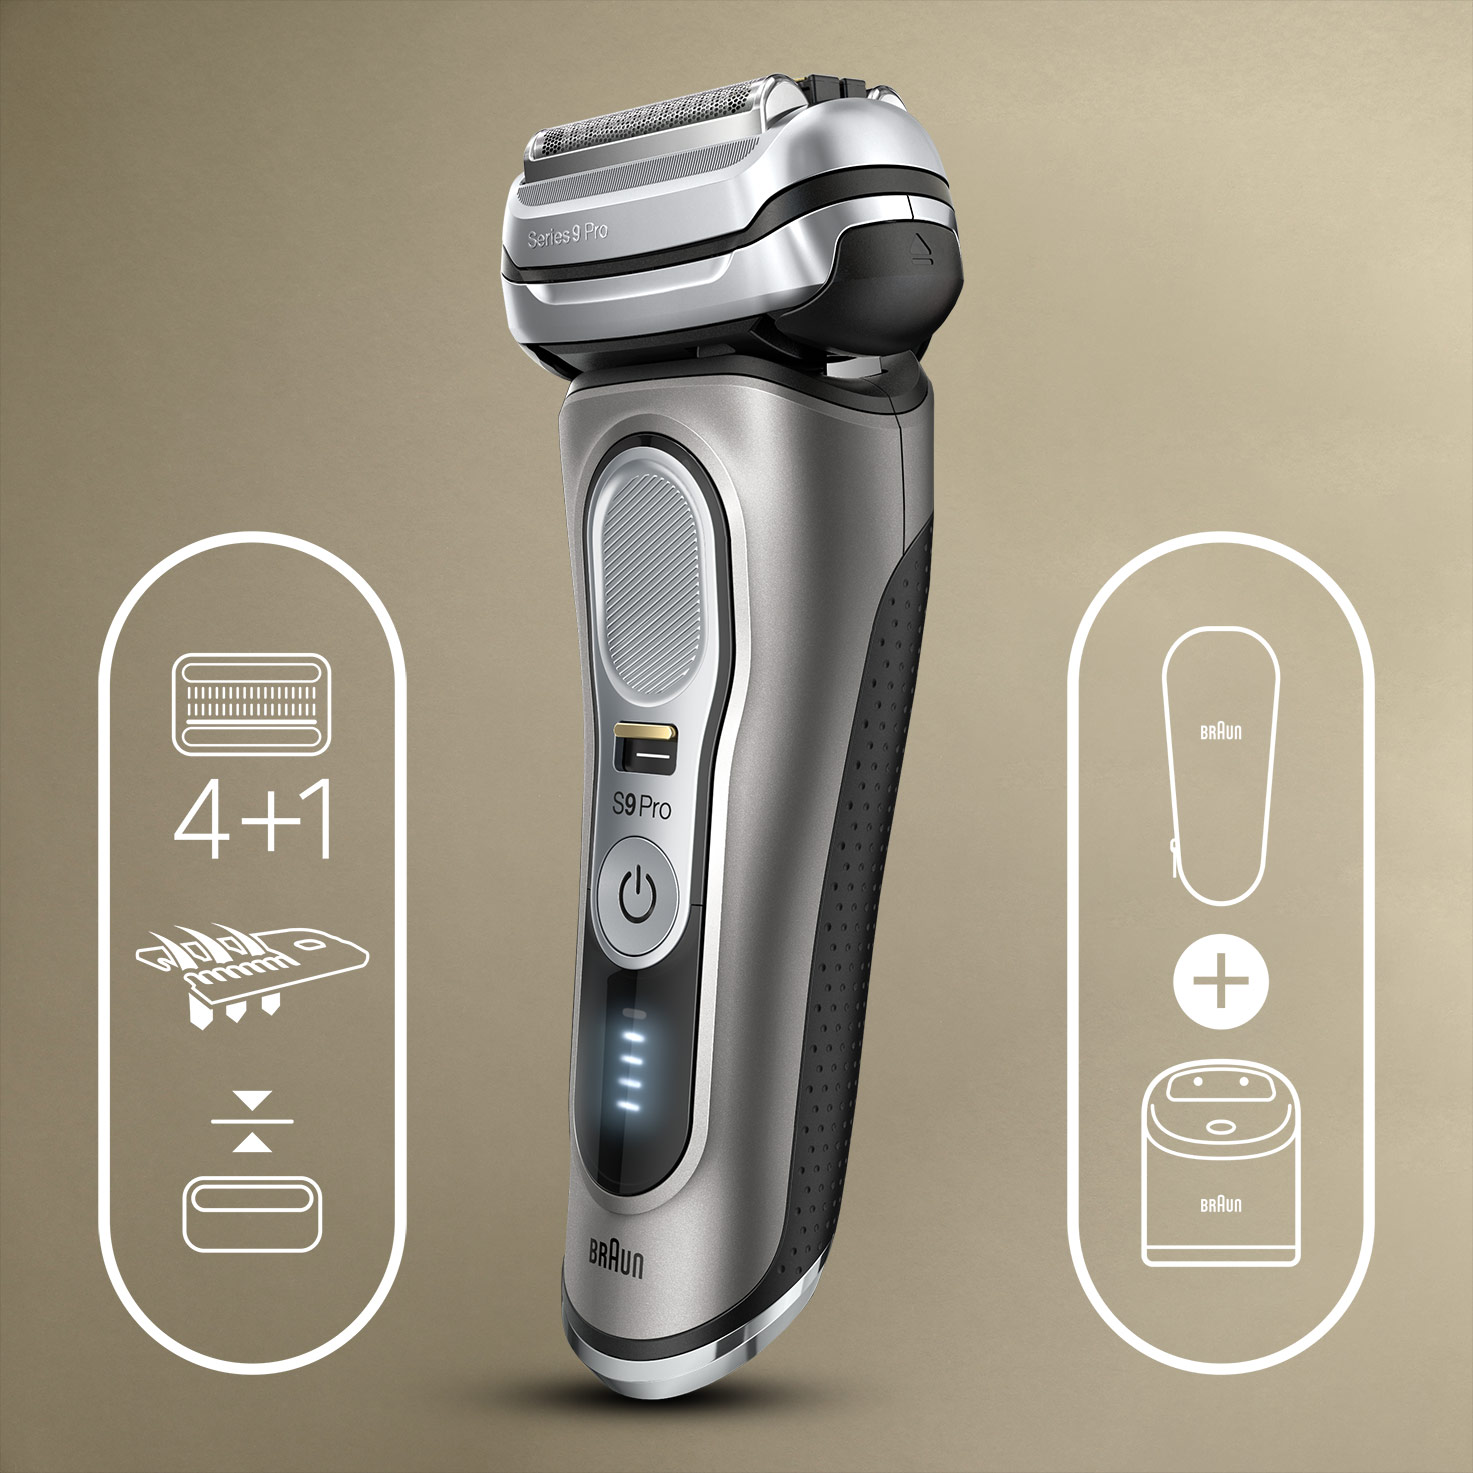 Series 9 Pro 9465cc Wet & Dry shaver with SmartCare center and 